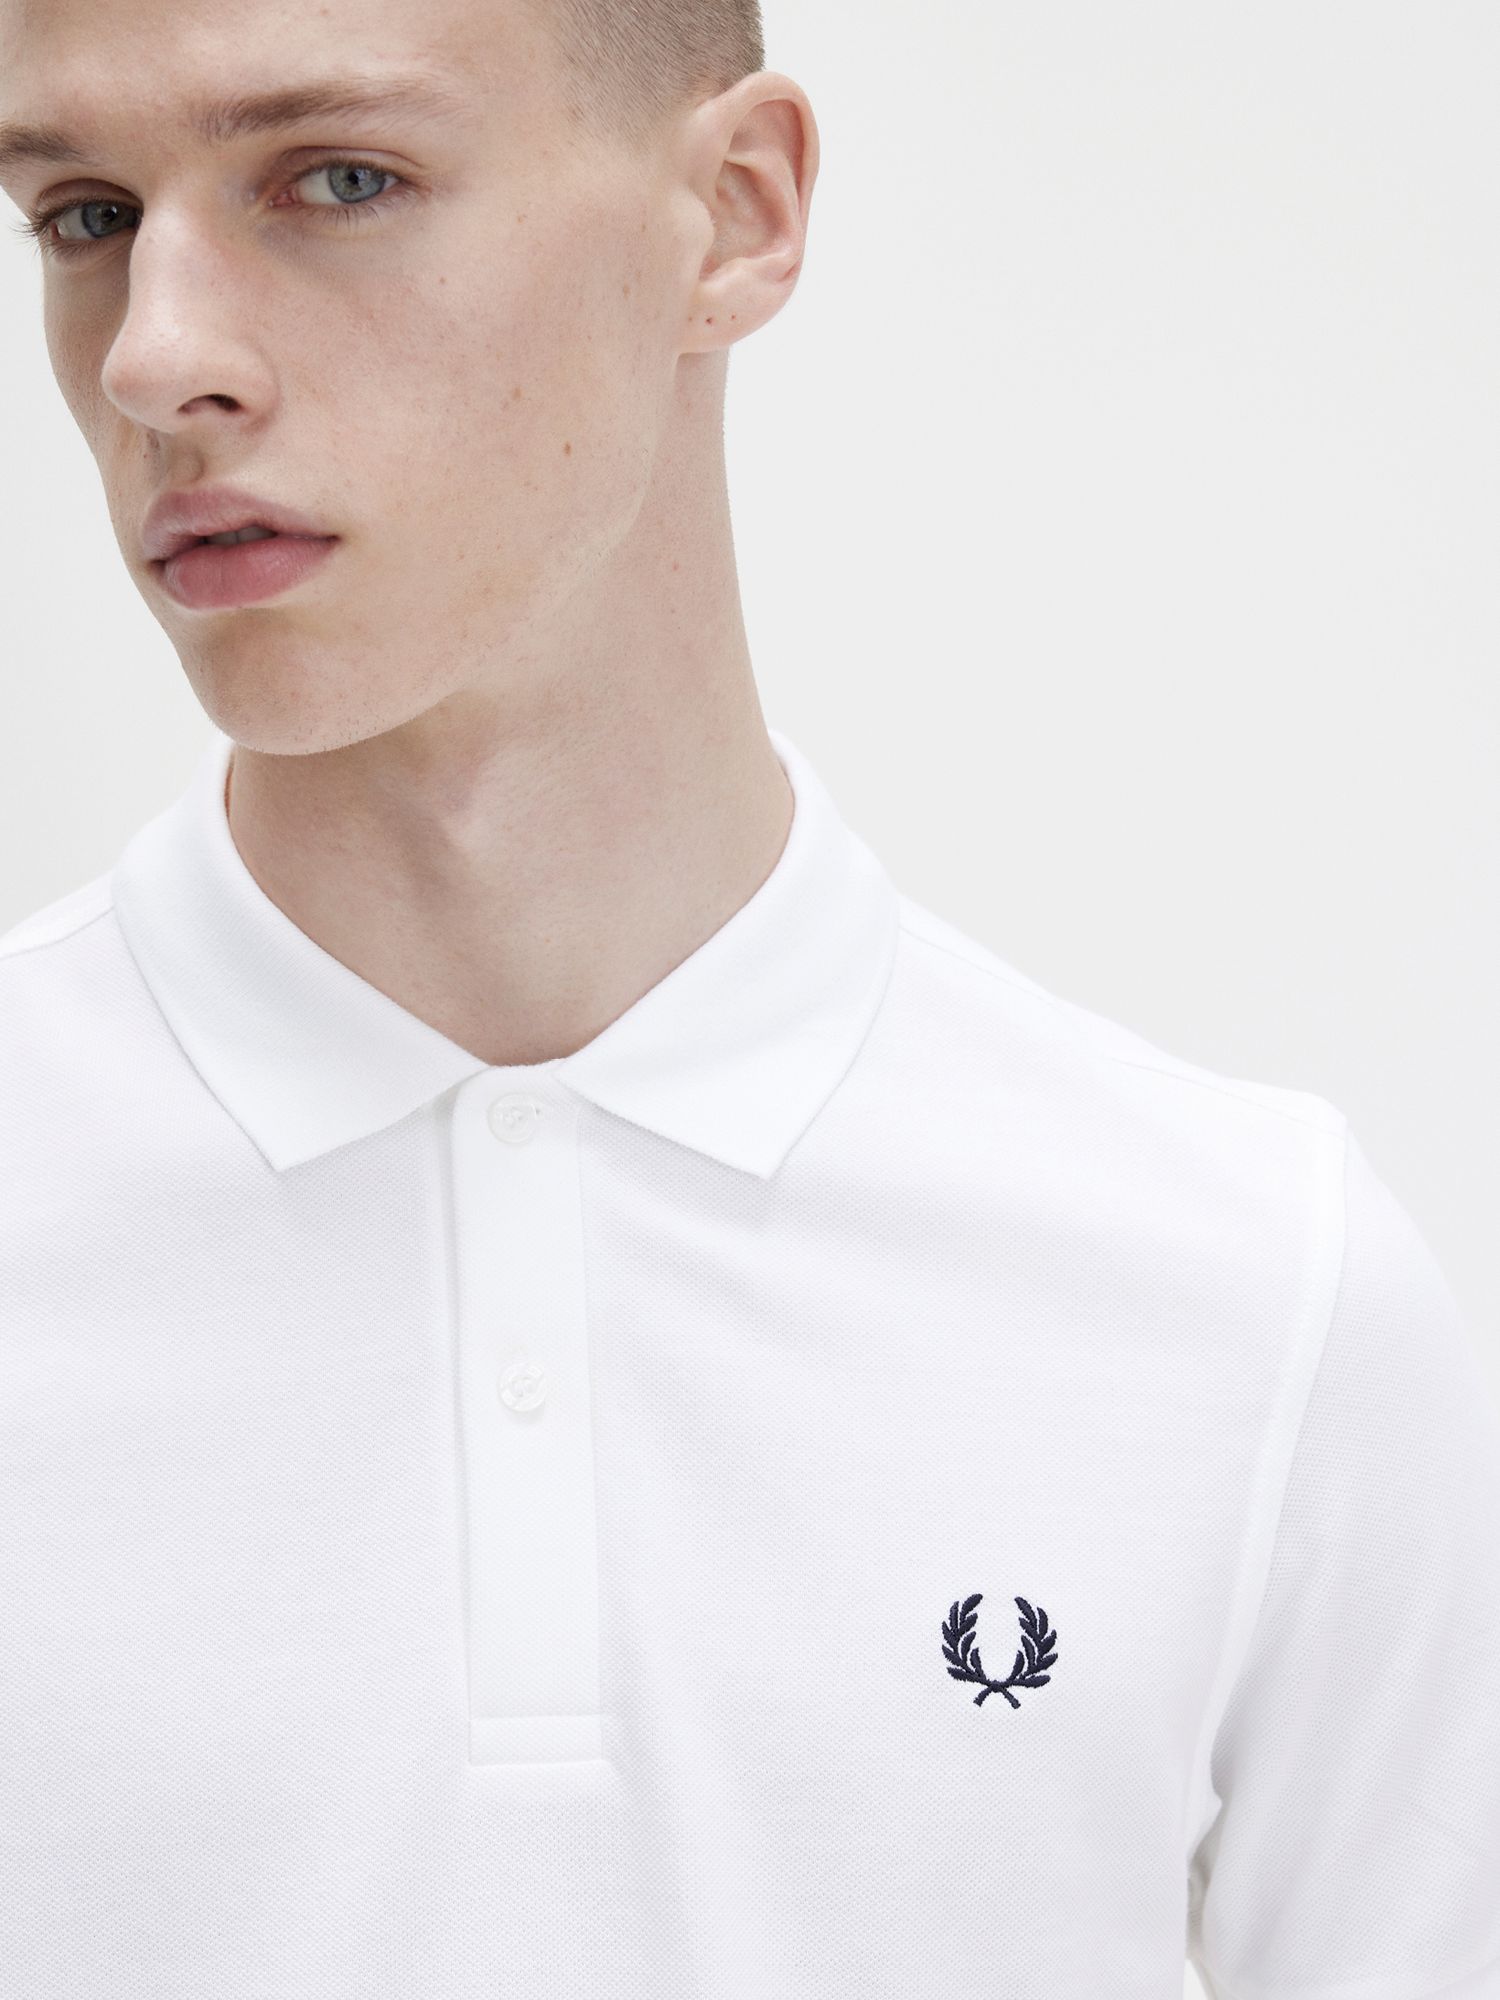 Fred Perry Plain Regular Fit Polo Shirt, White, S